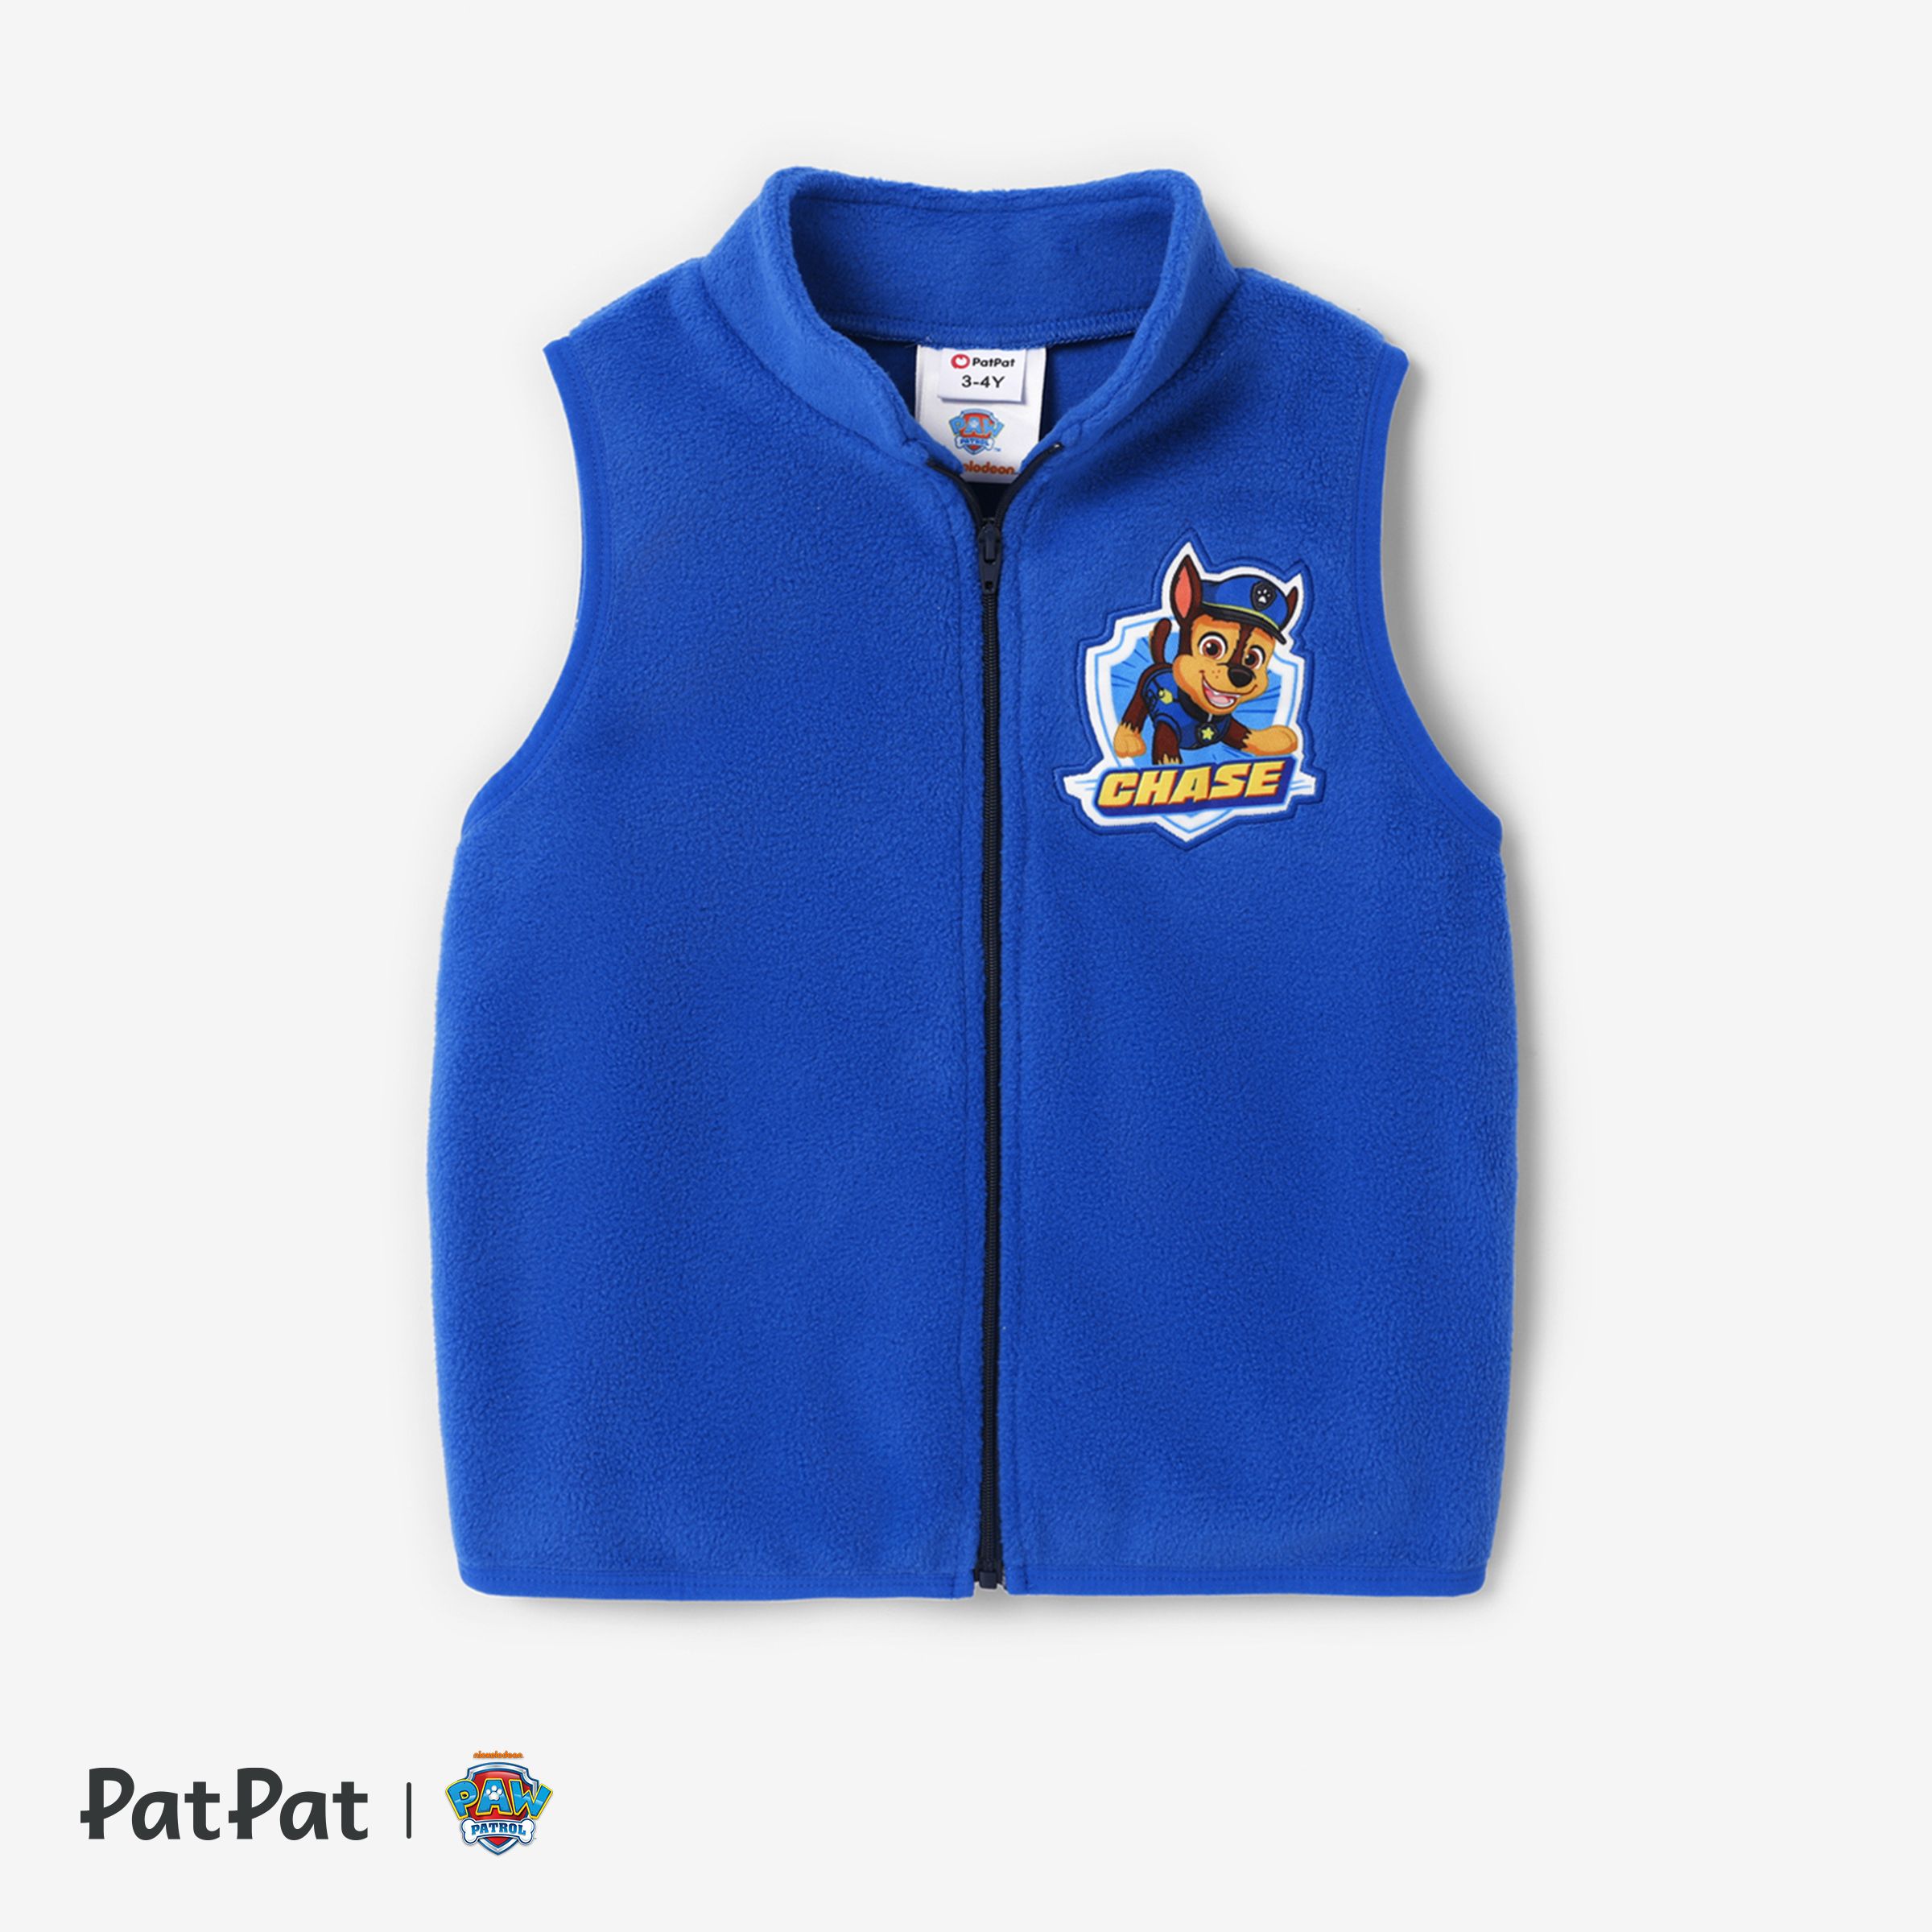 PAW Patrol Toddler Boy Character Print White Top Or Blue Waistcoat Or Black Pants